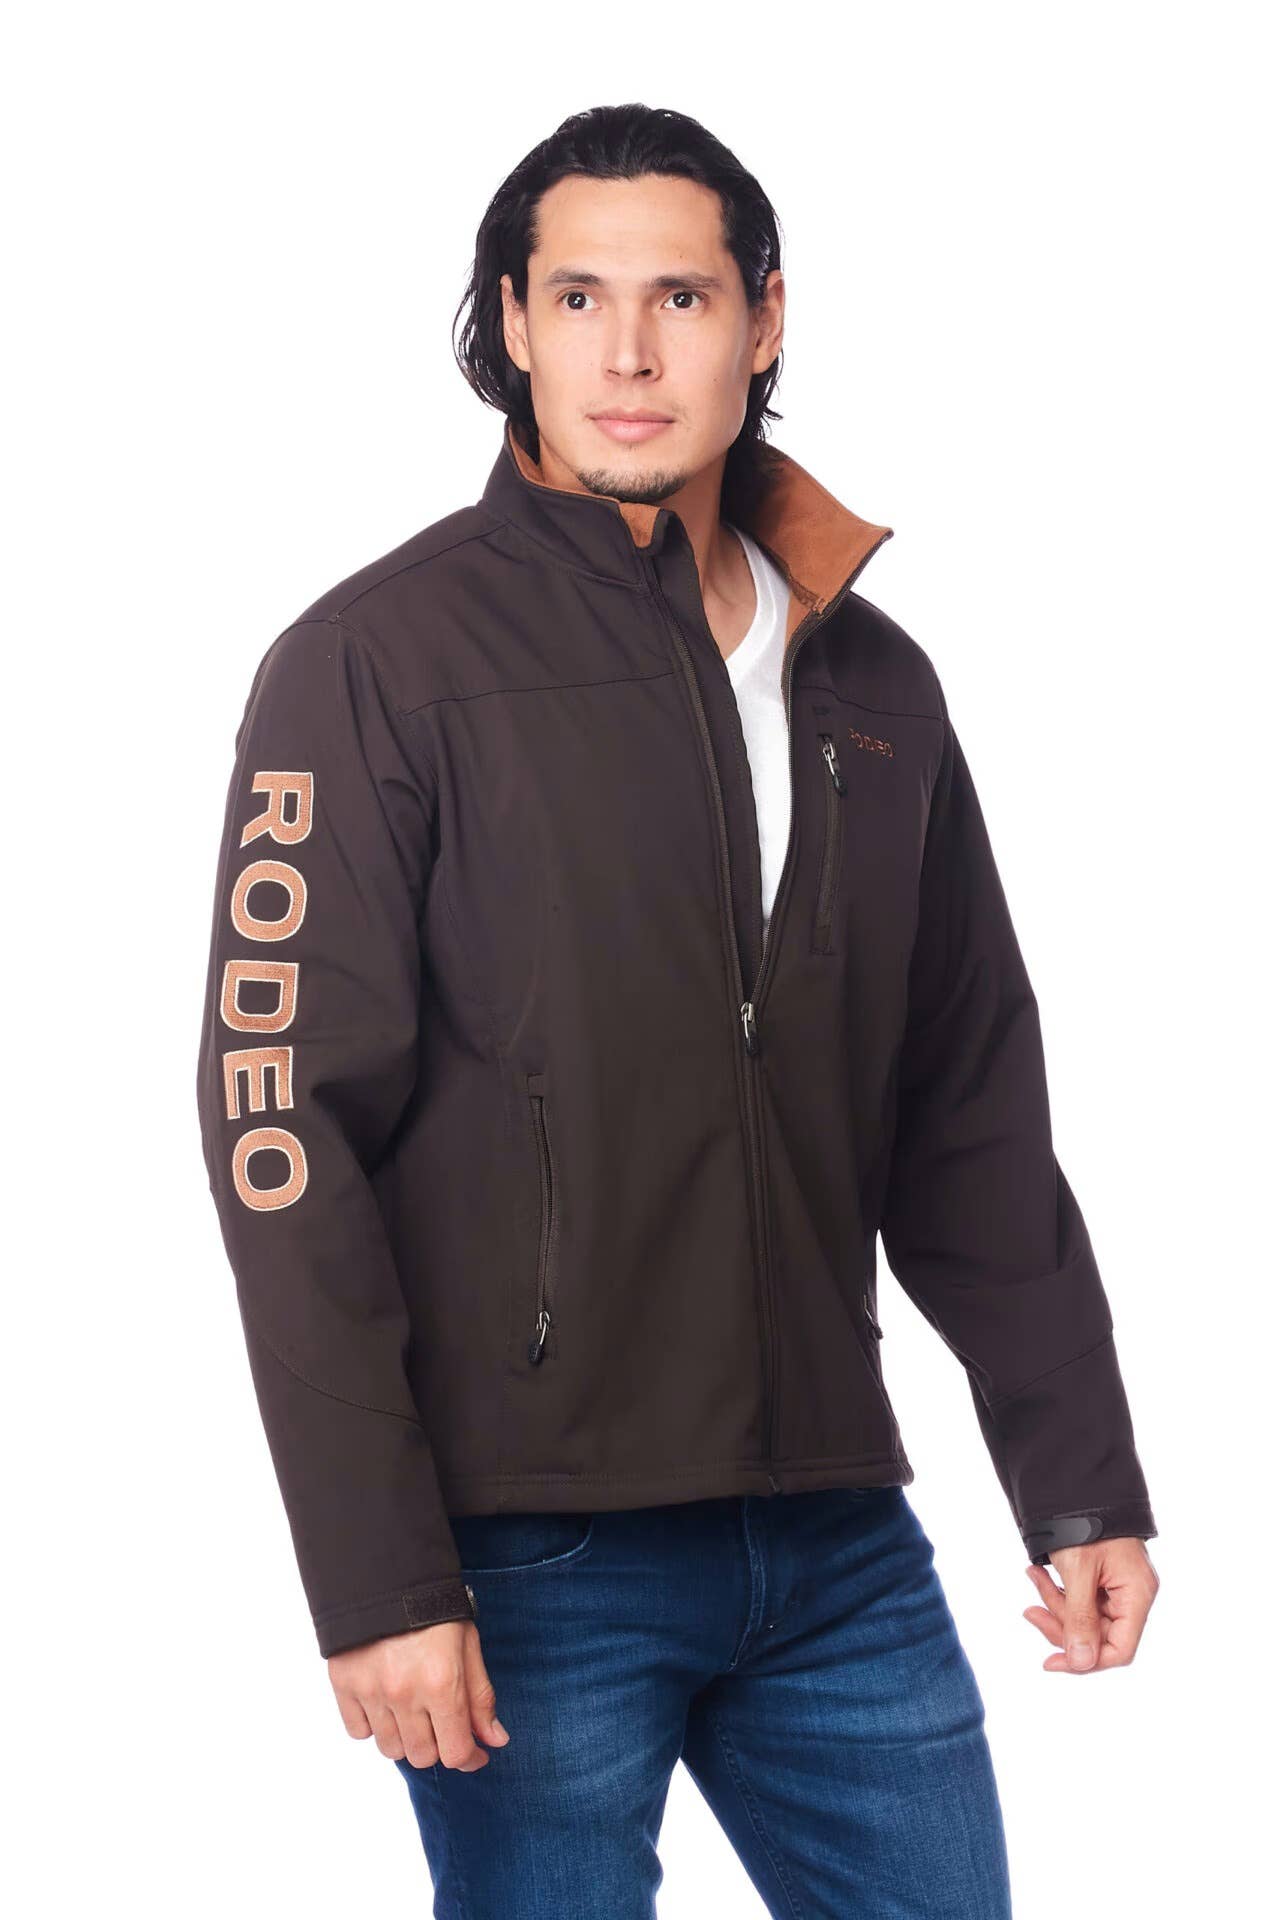 RODEO CLOTHING Men's Embroidery Sports Jacket